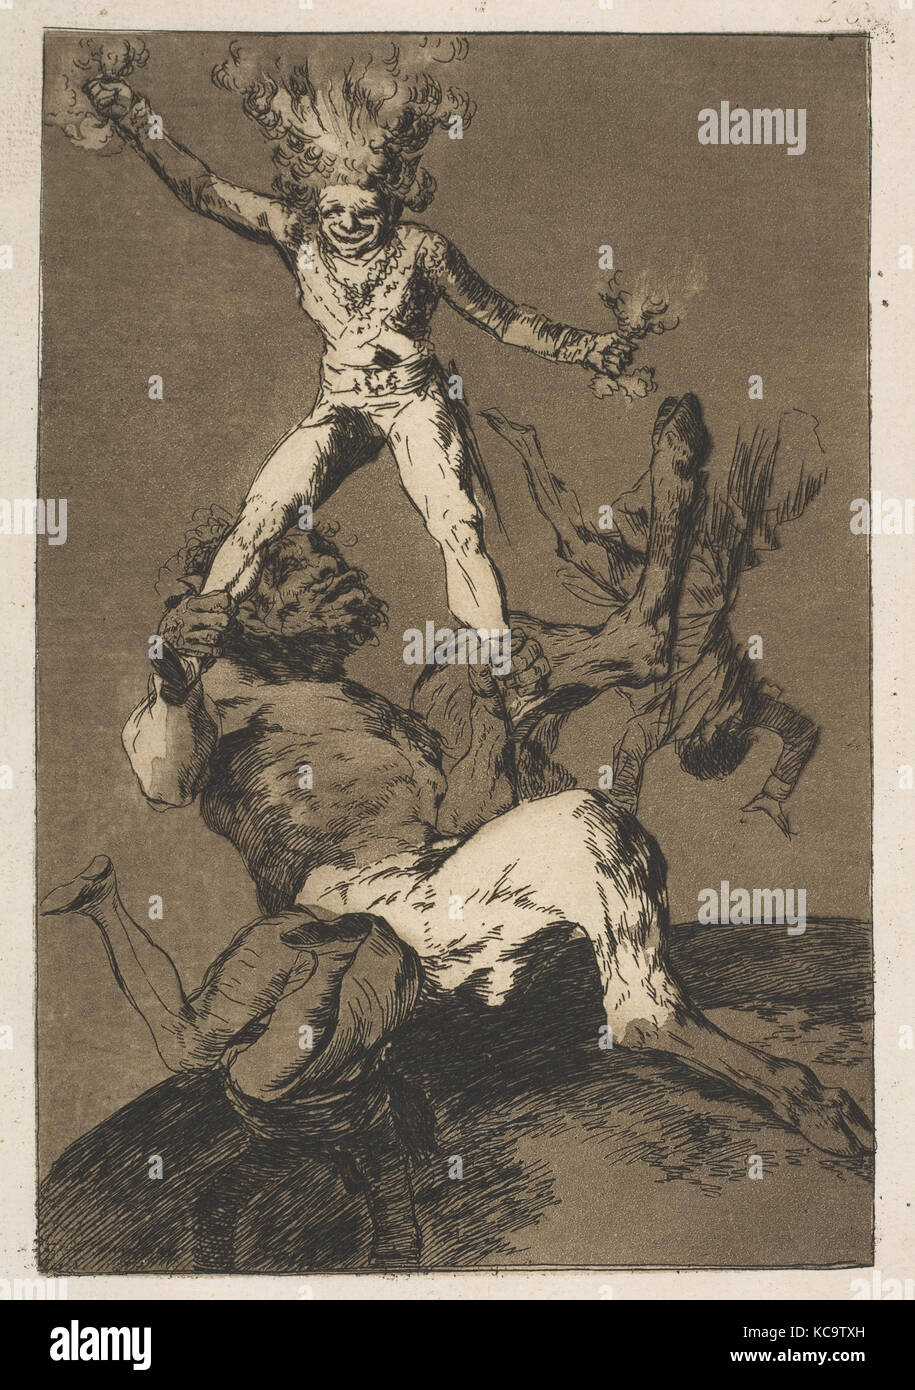 Plate 56 from 'Los Caprichos':To rise and to fall (Subir y bajar.), Goya, 1799 Stock Photo